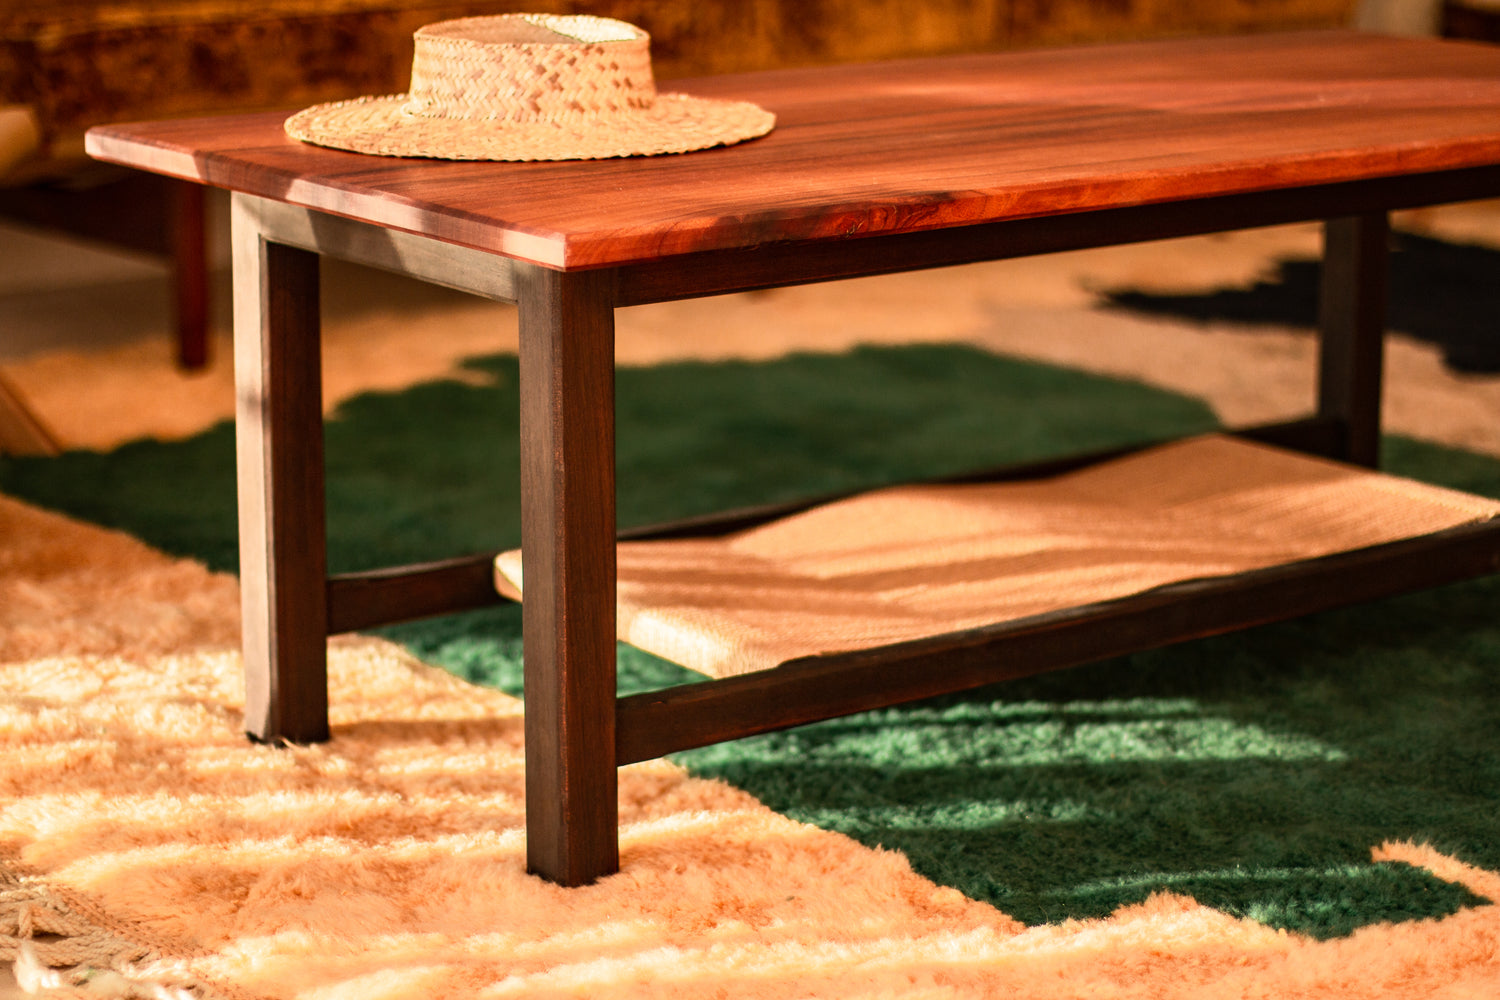 Mahogany Hibal Coffee Table sits on a geometric green and cream rug, with woven hat on top.